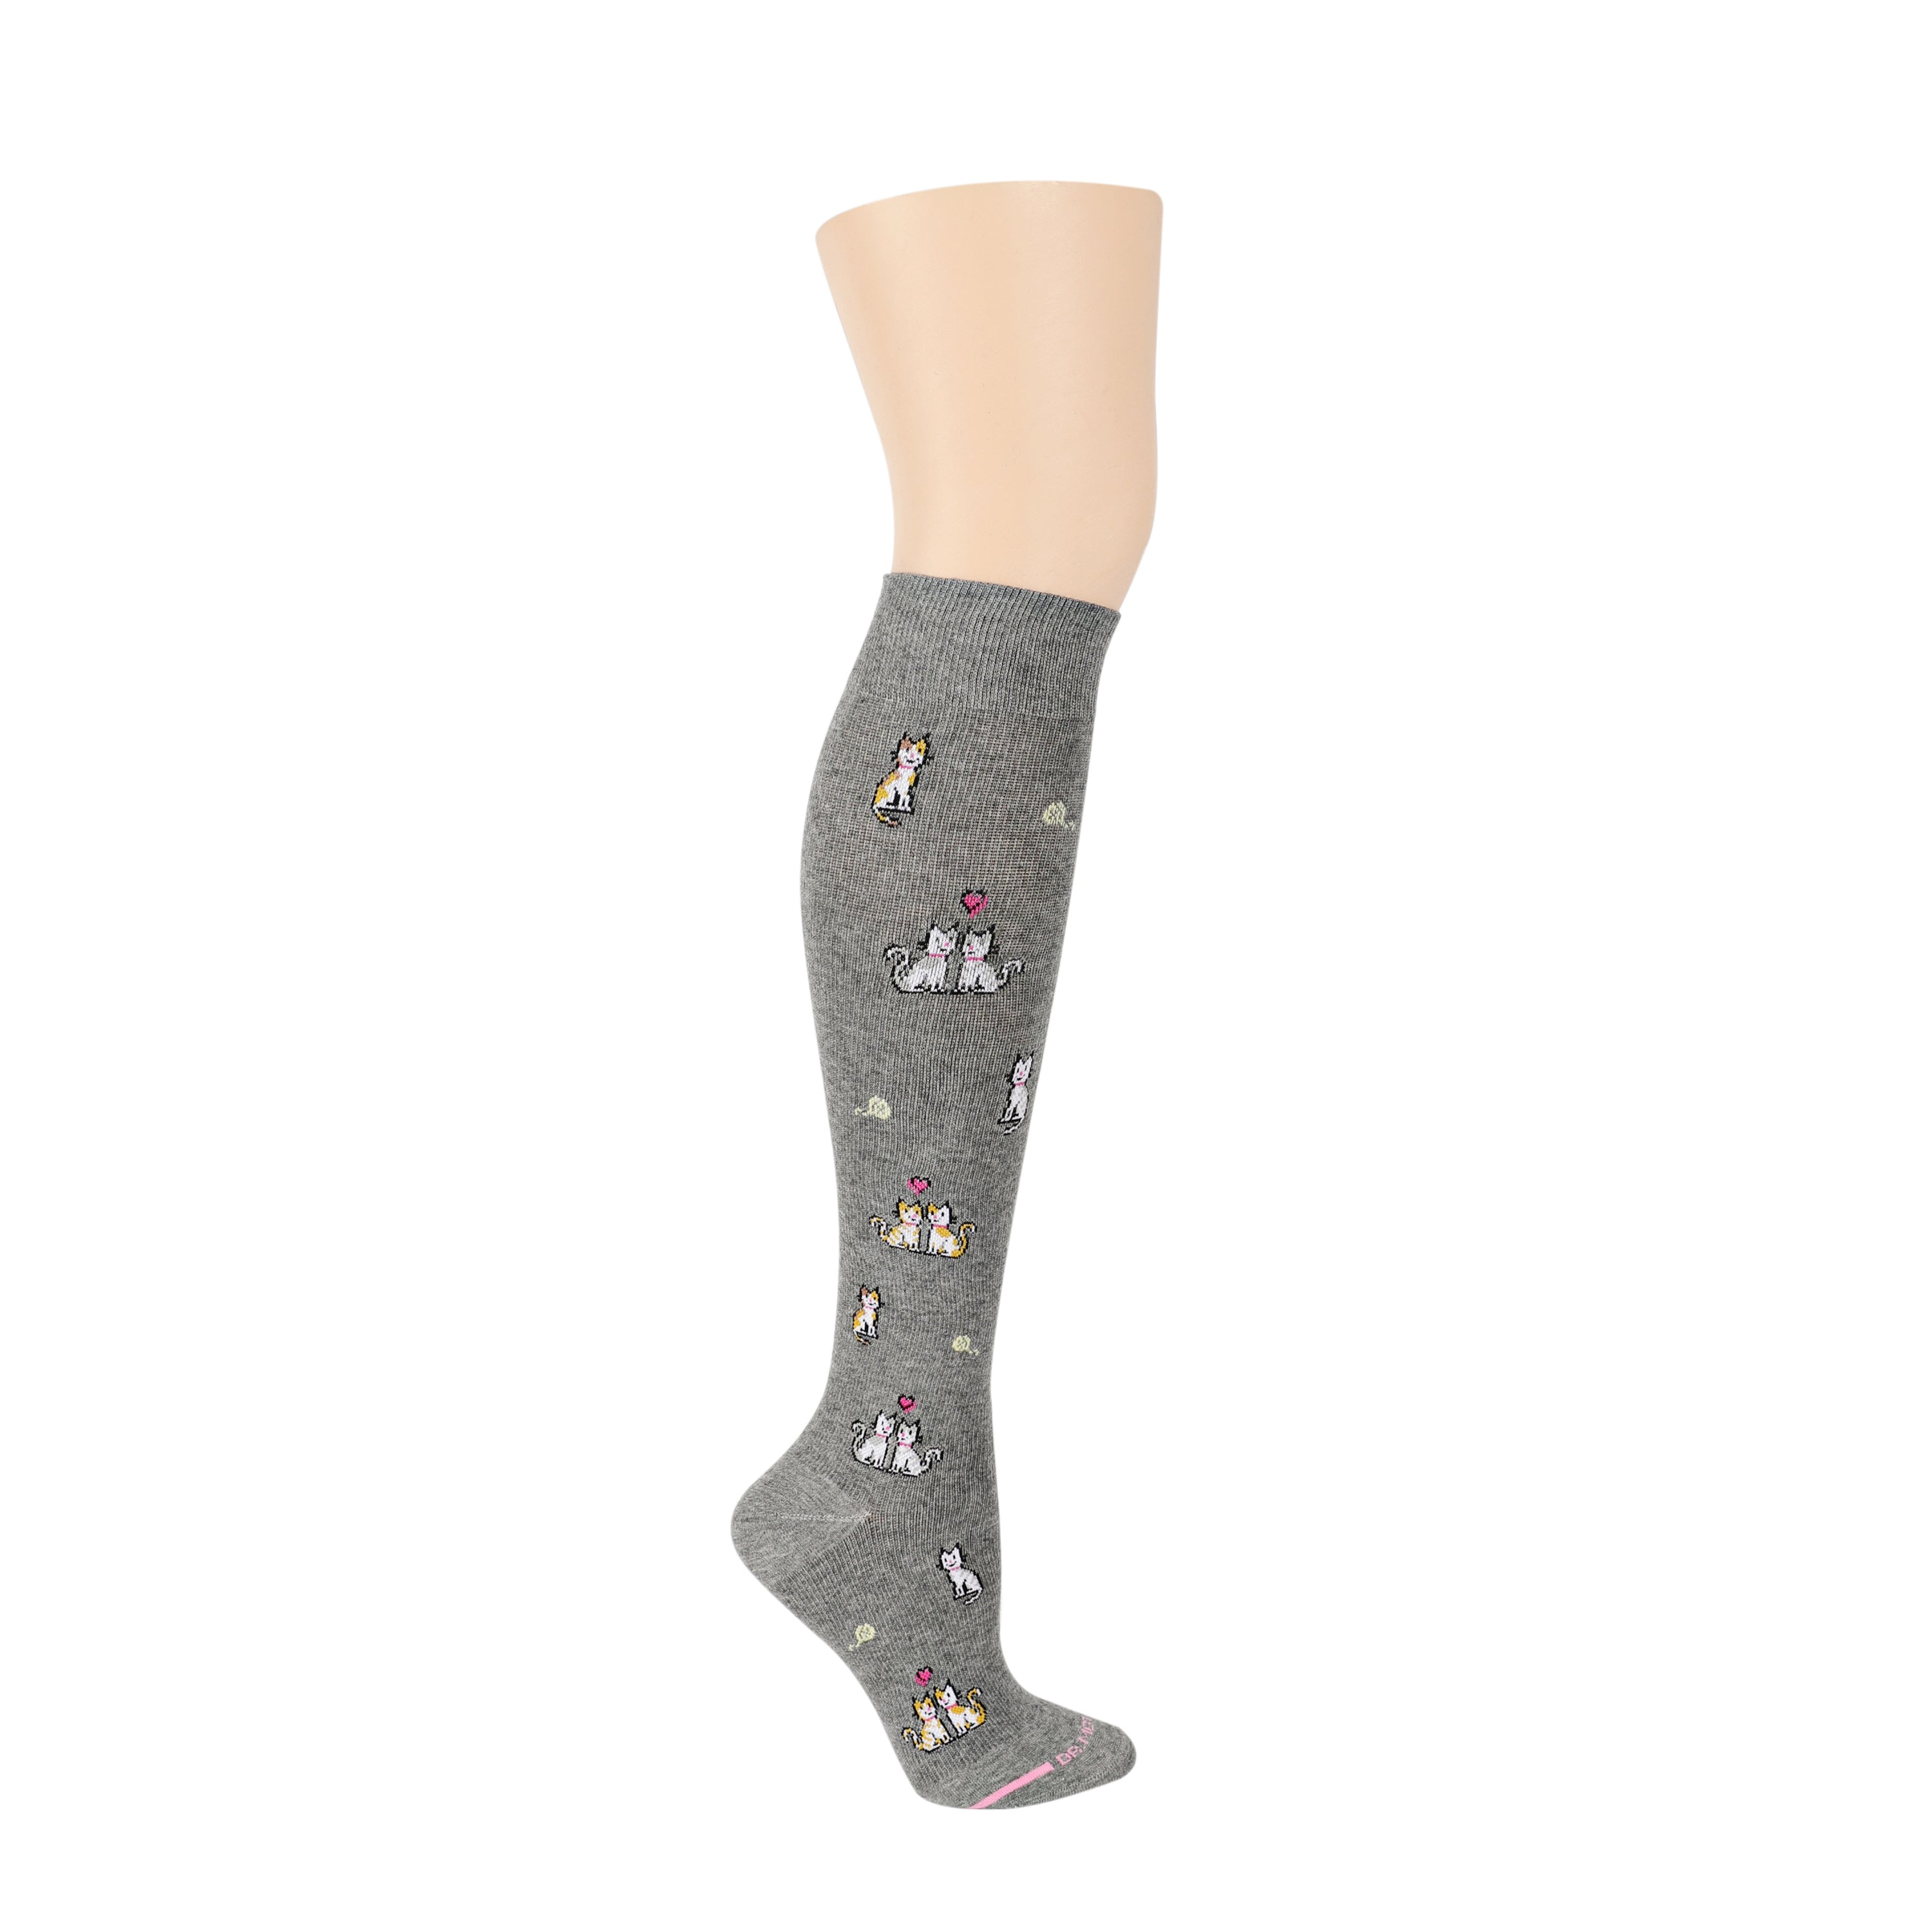 Love Cats | Knee-High Compression Socks For Women